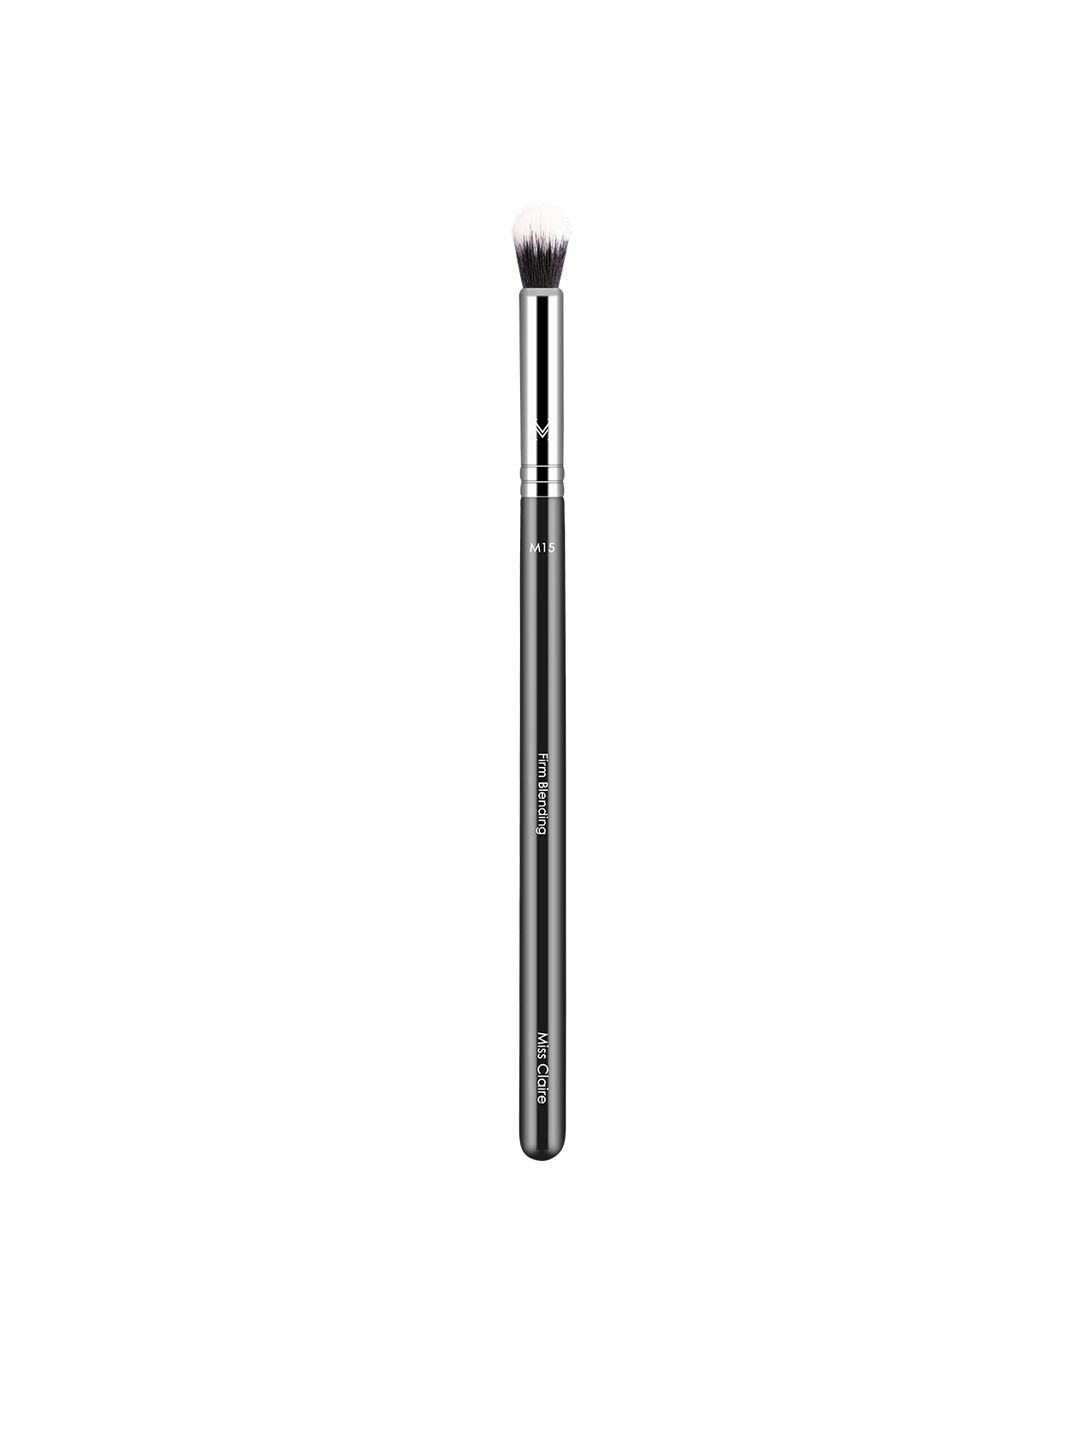 Miss Claire M15 - Firm Blending Eye Brush - Silver-Toned & Black Price in India